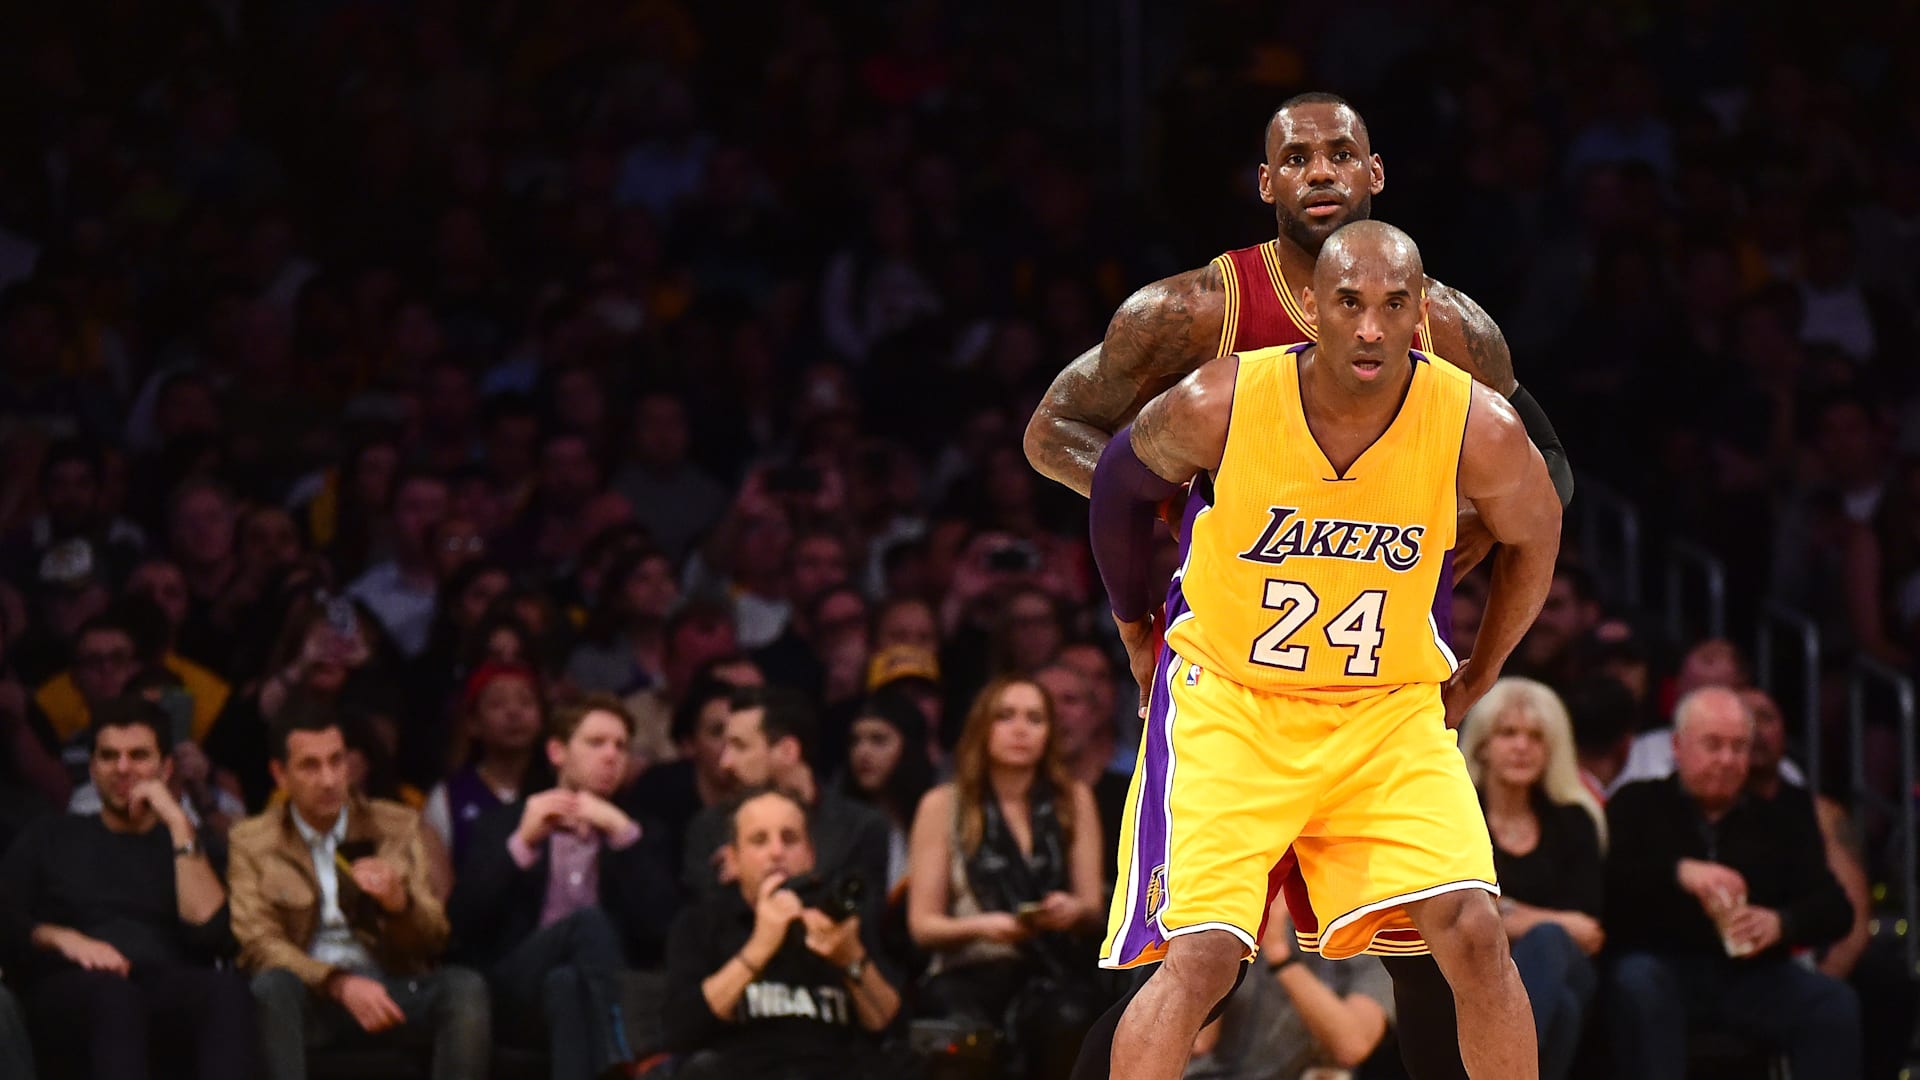 Heartbroken' LeBron James says he will continue Kobe Bryant's 'legacy', US  News